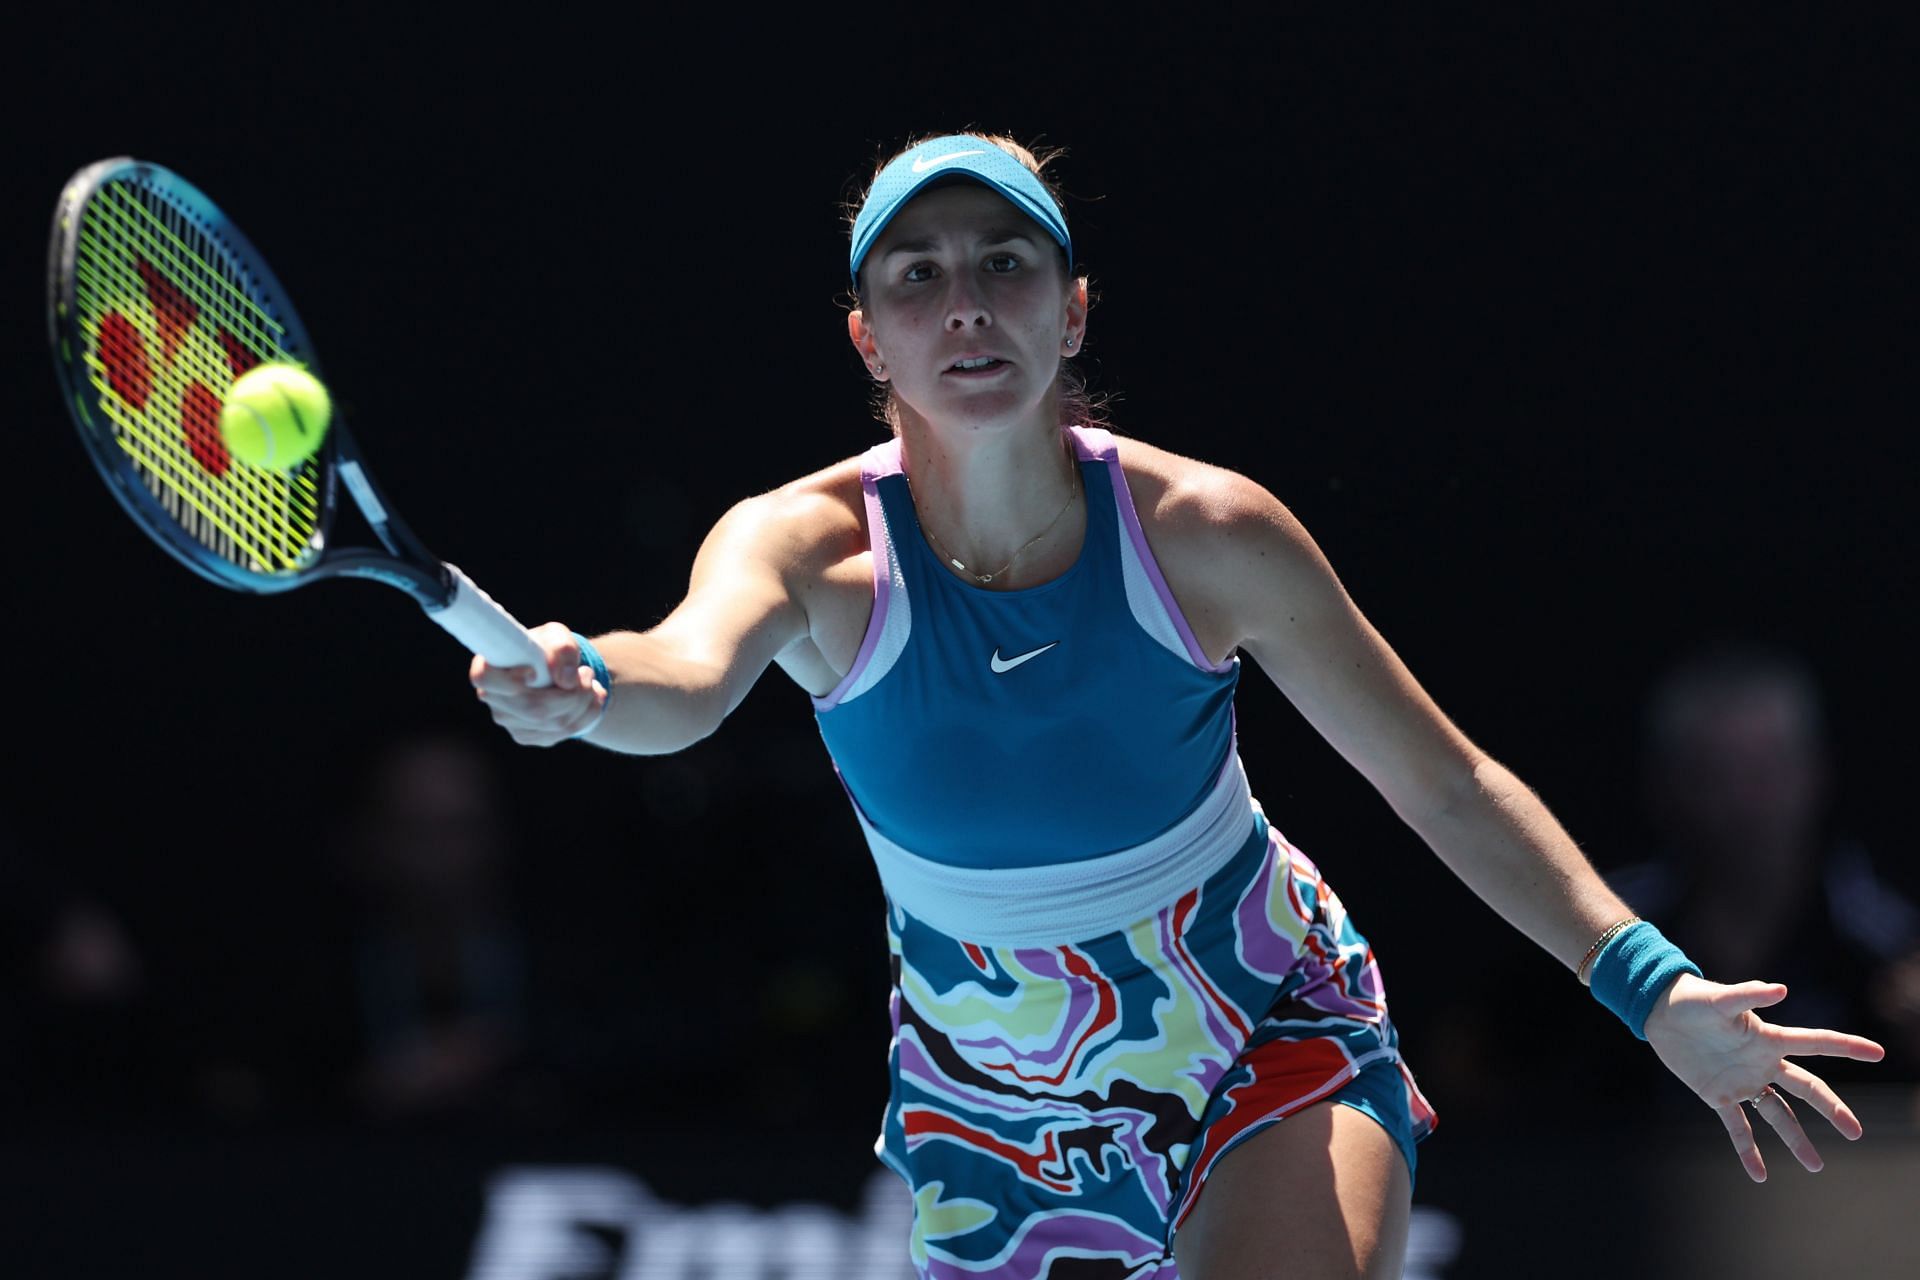 Bencic in action at the 2023 Australian Open